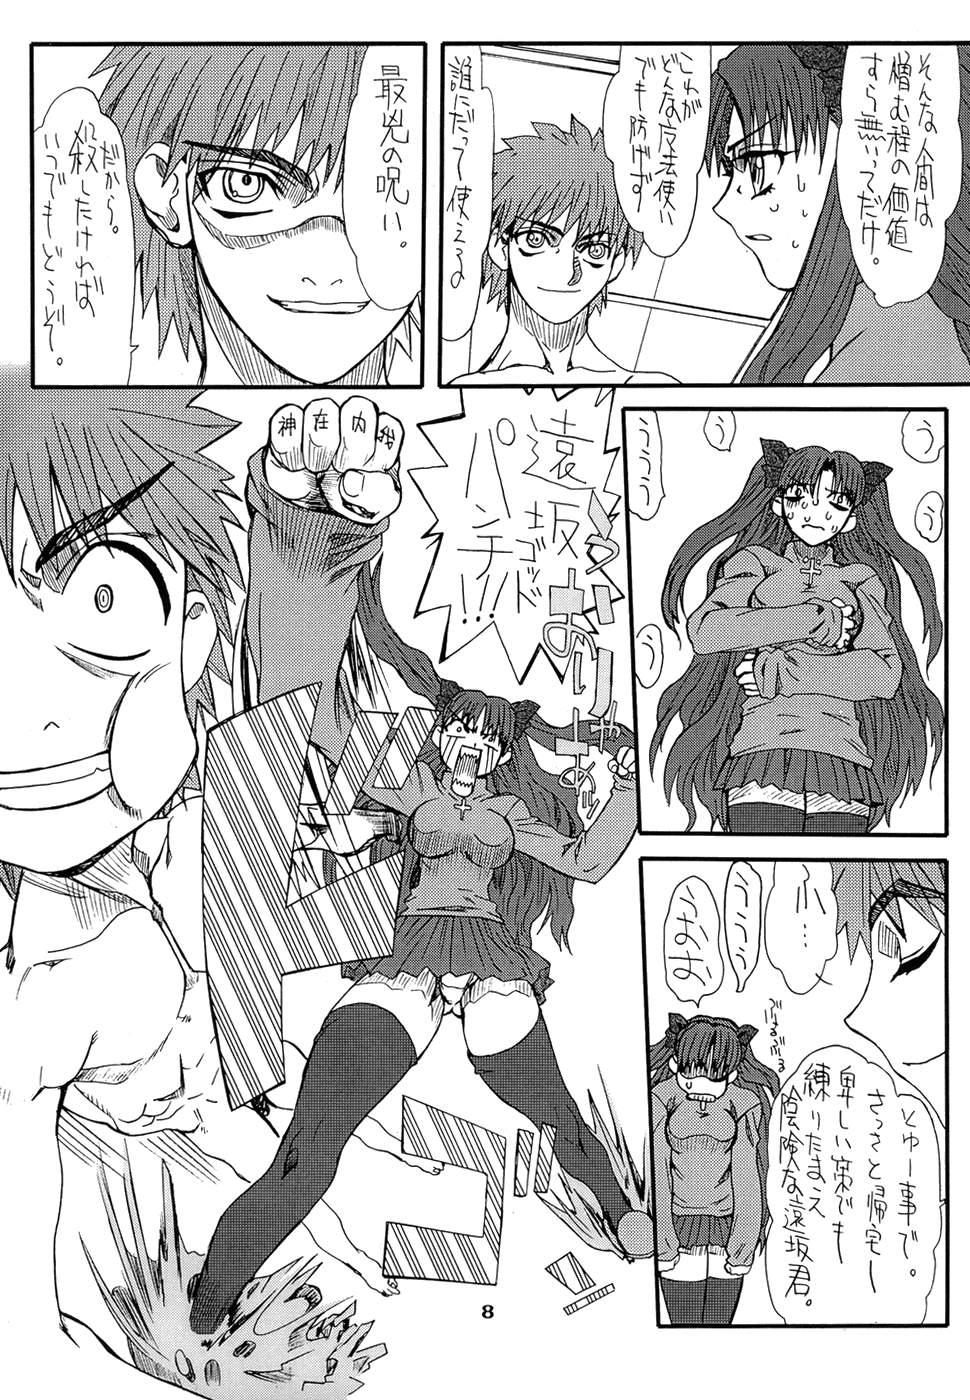 Picked Up Akihime San - Fate stay night Naturaltits - Page 8